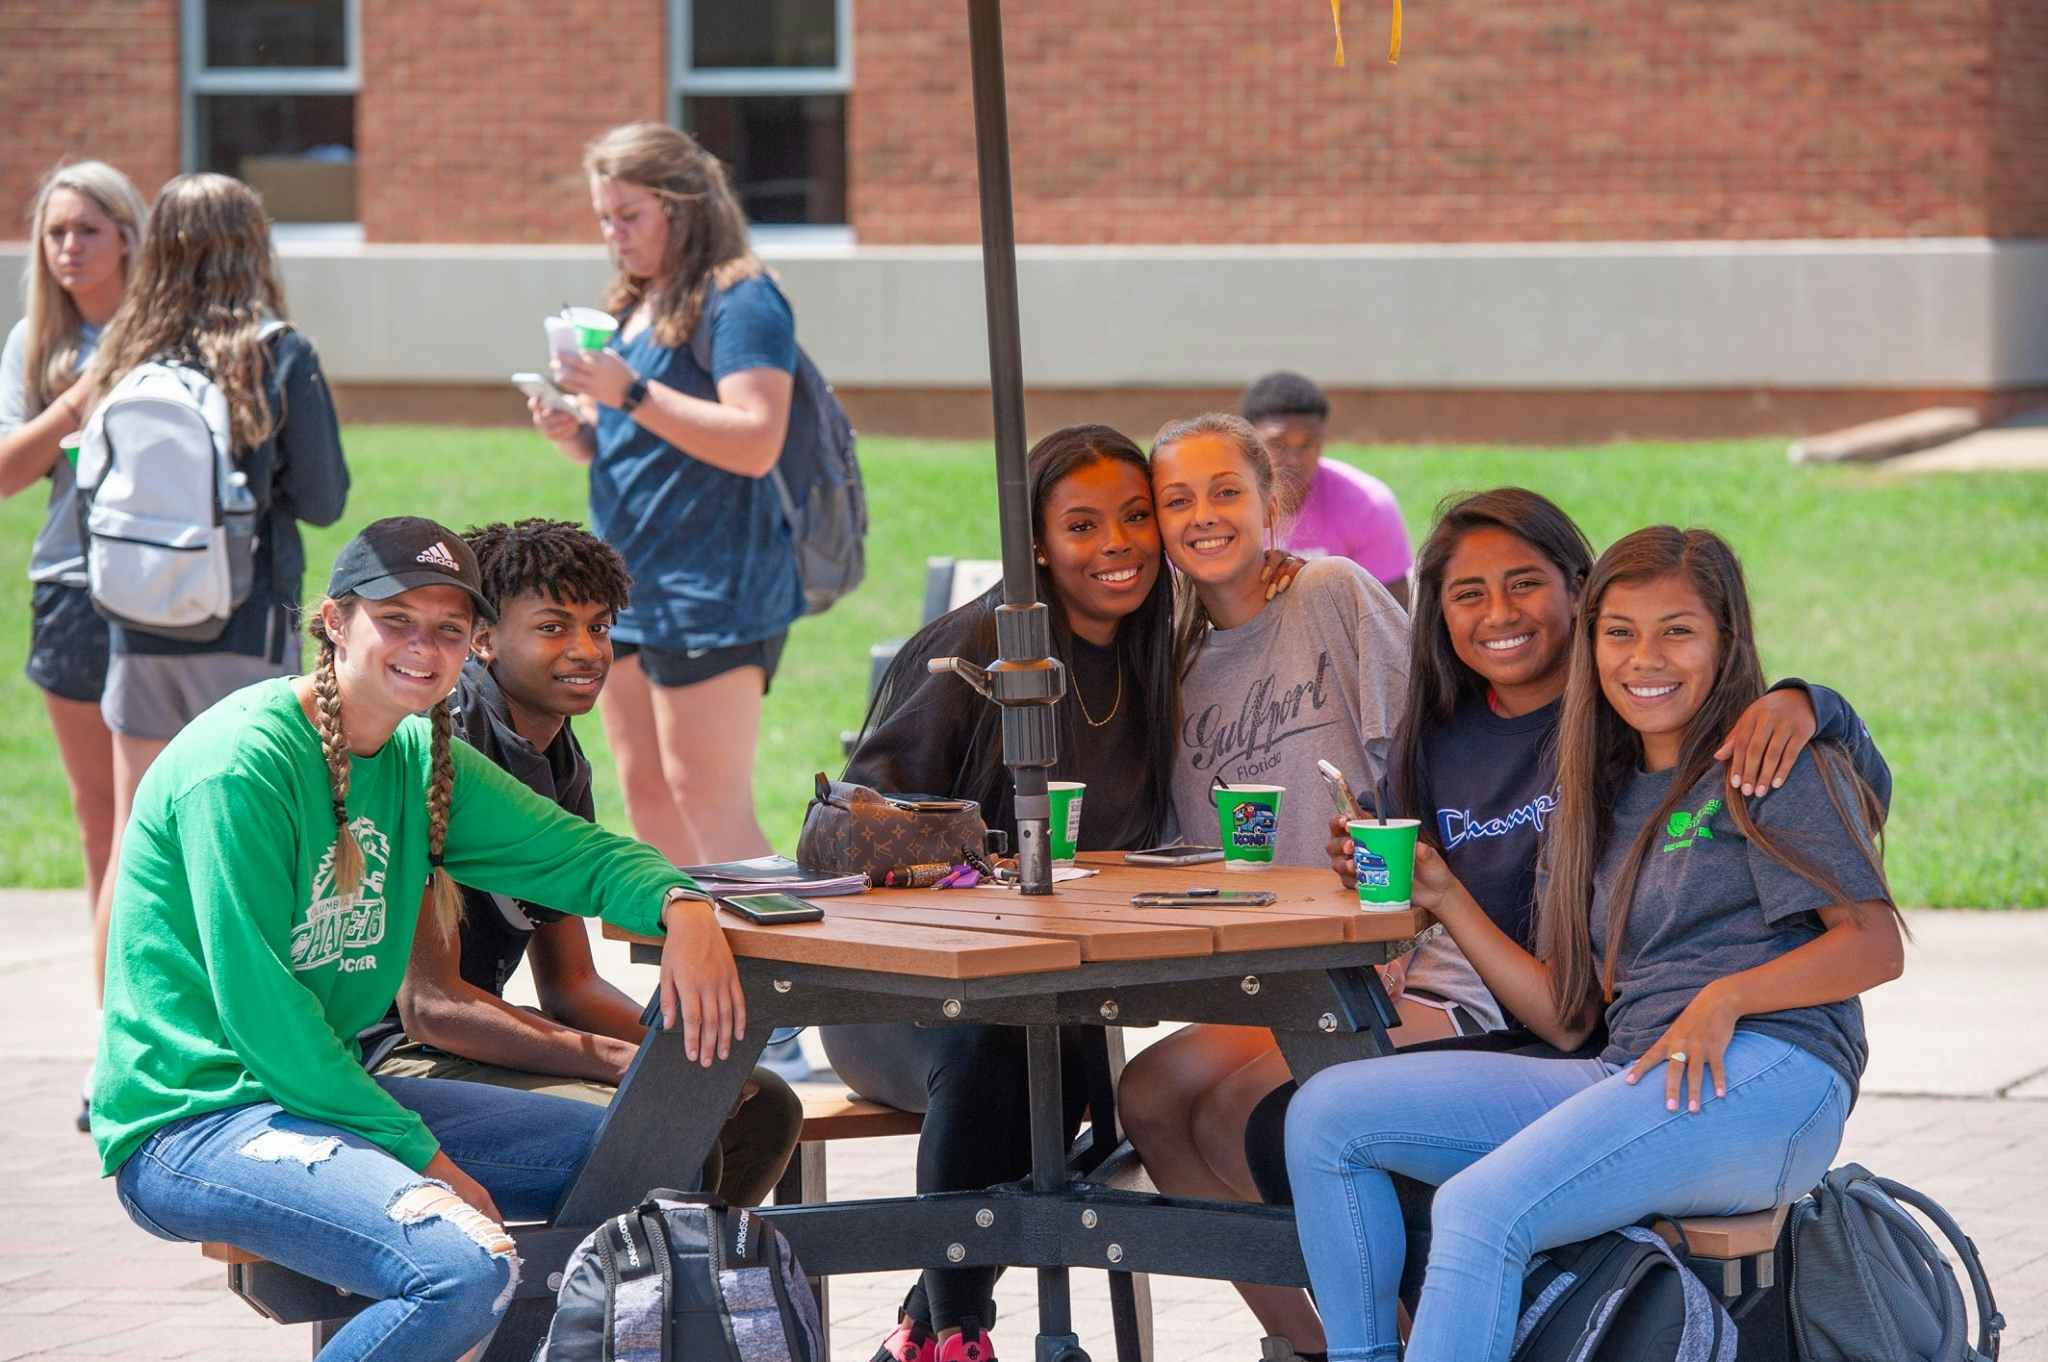 A group of students at Columbia State Community College sitting at a table on campus and smiling.